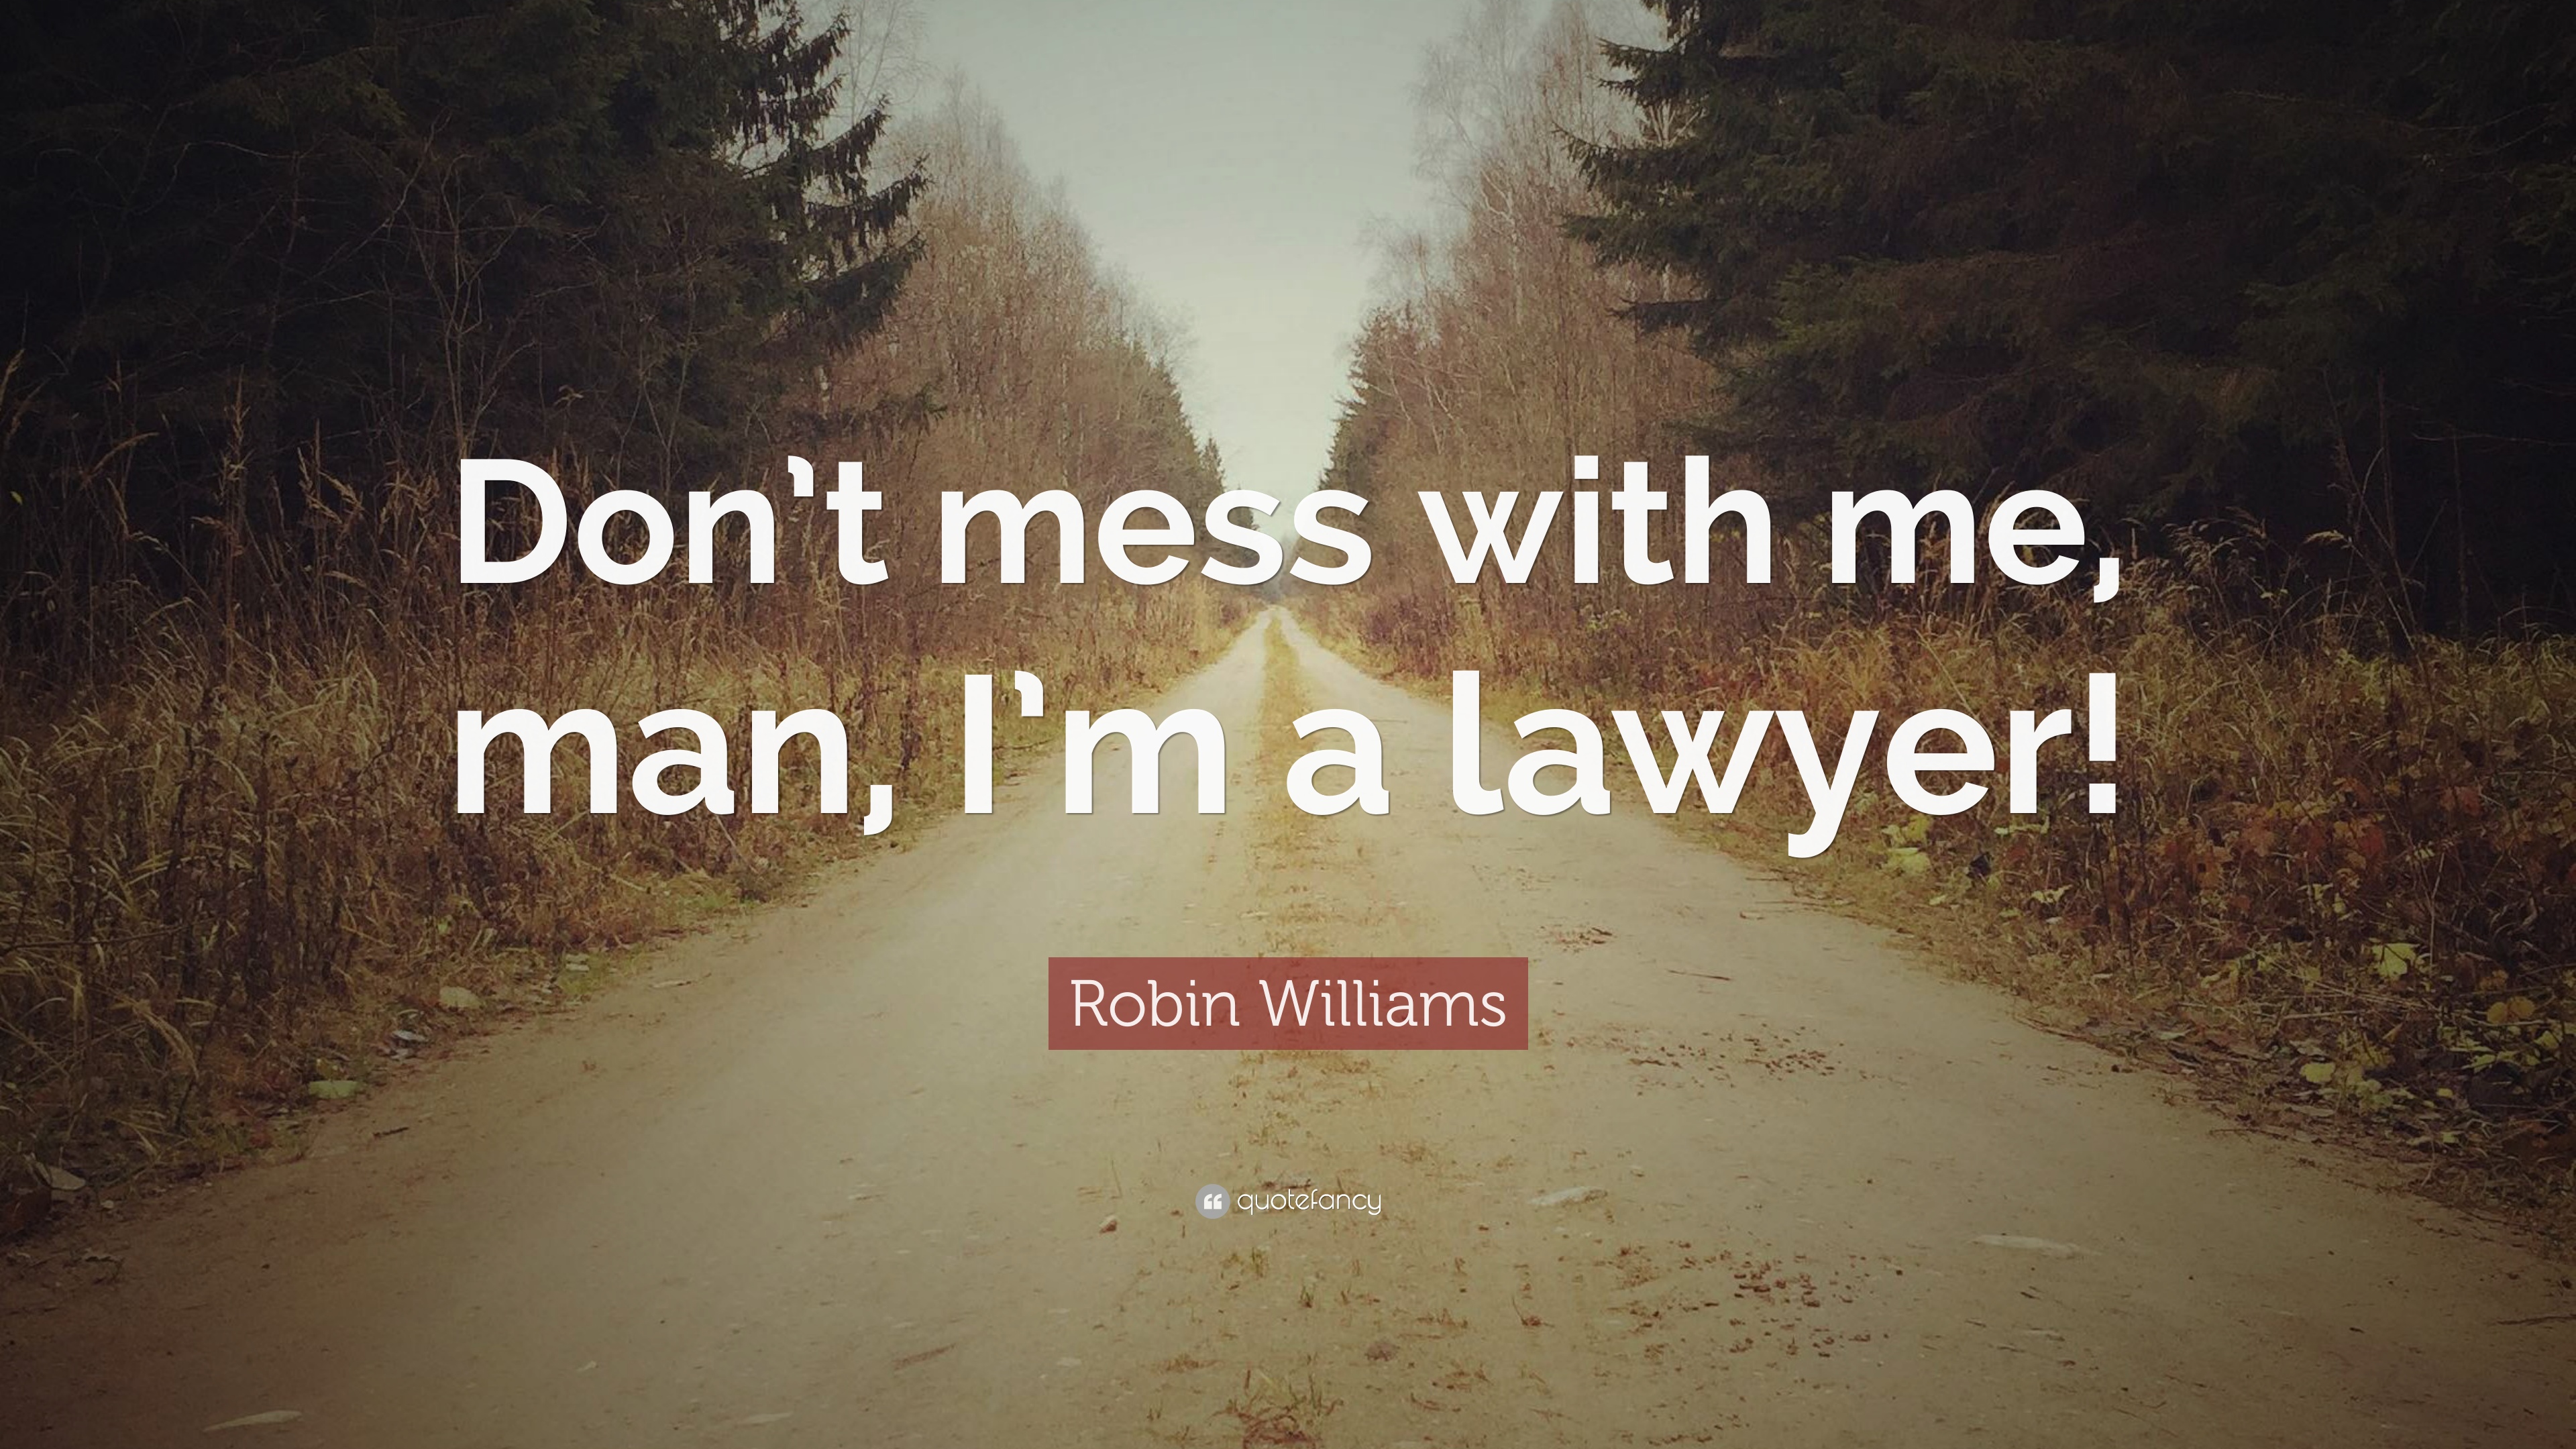 Robin Williams Quote: “Don't mess with me, man, I'm a lawyer!” 12